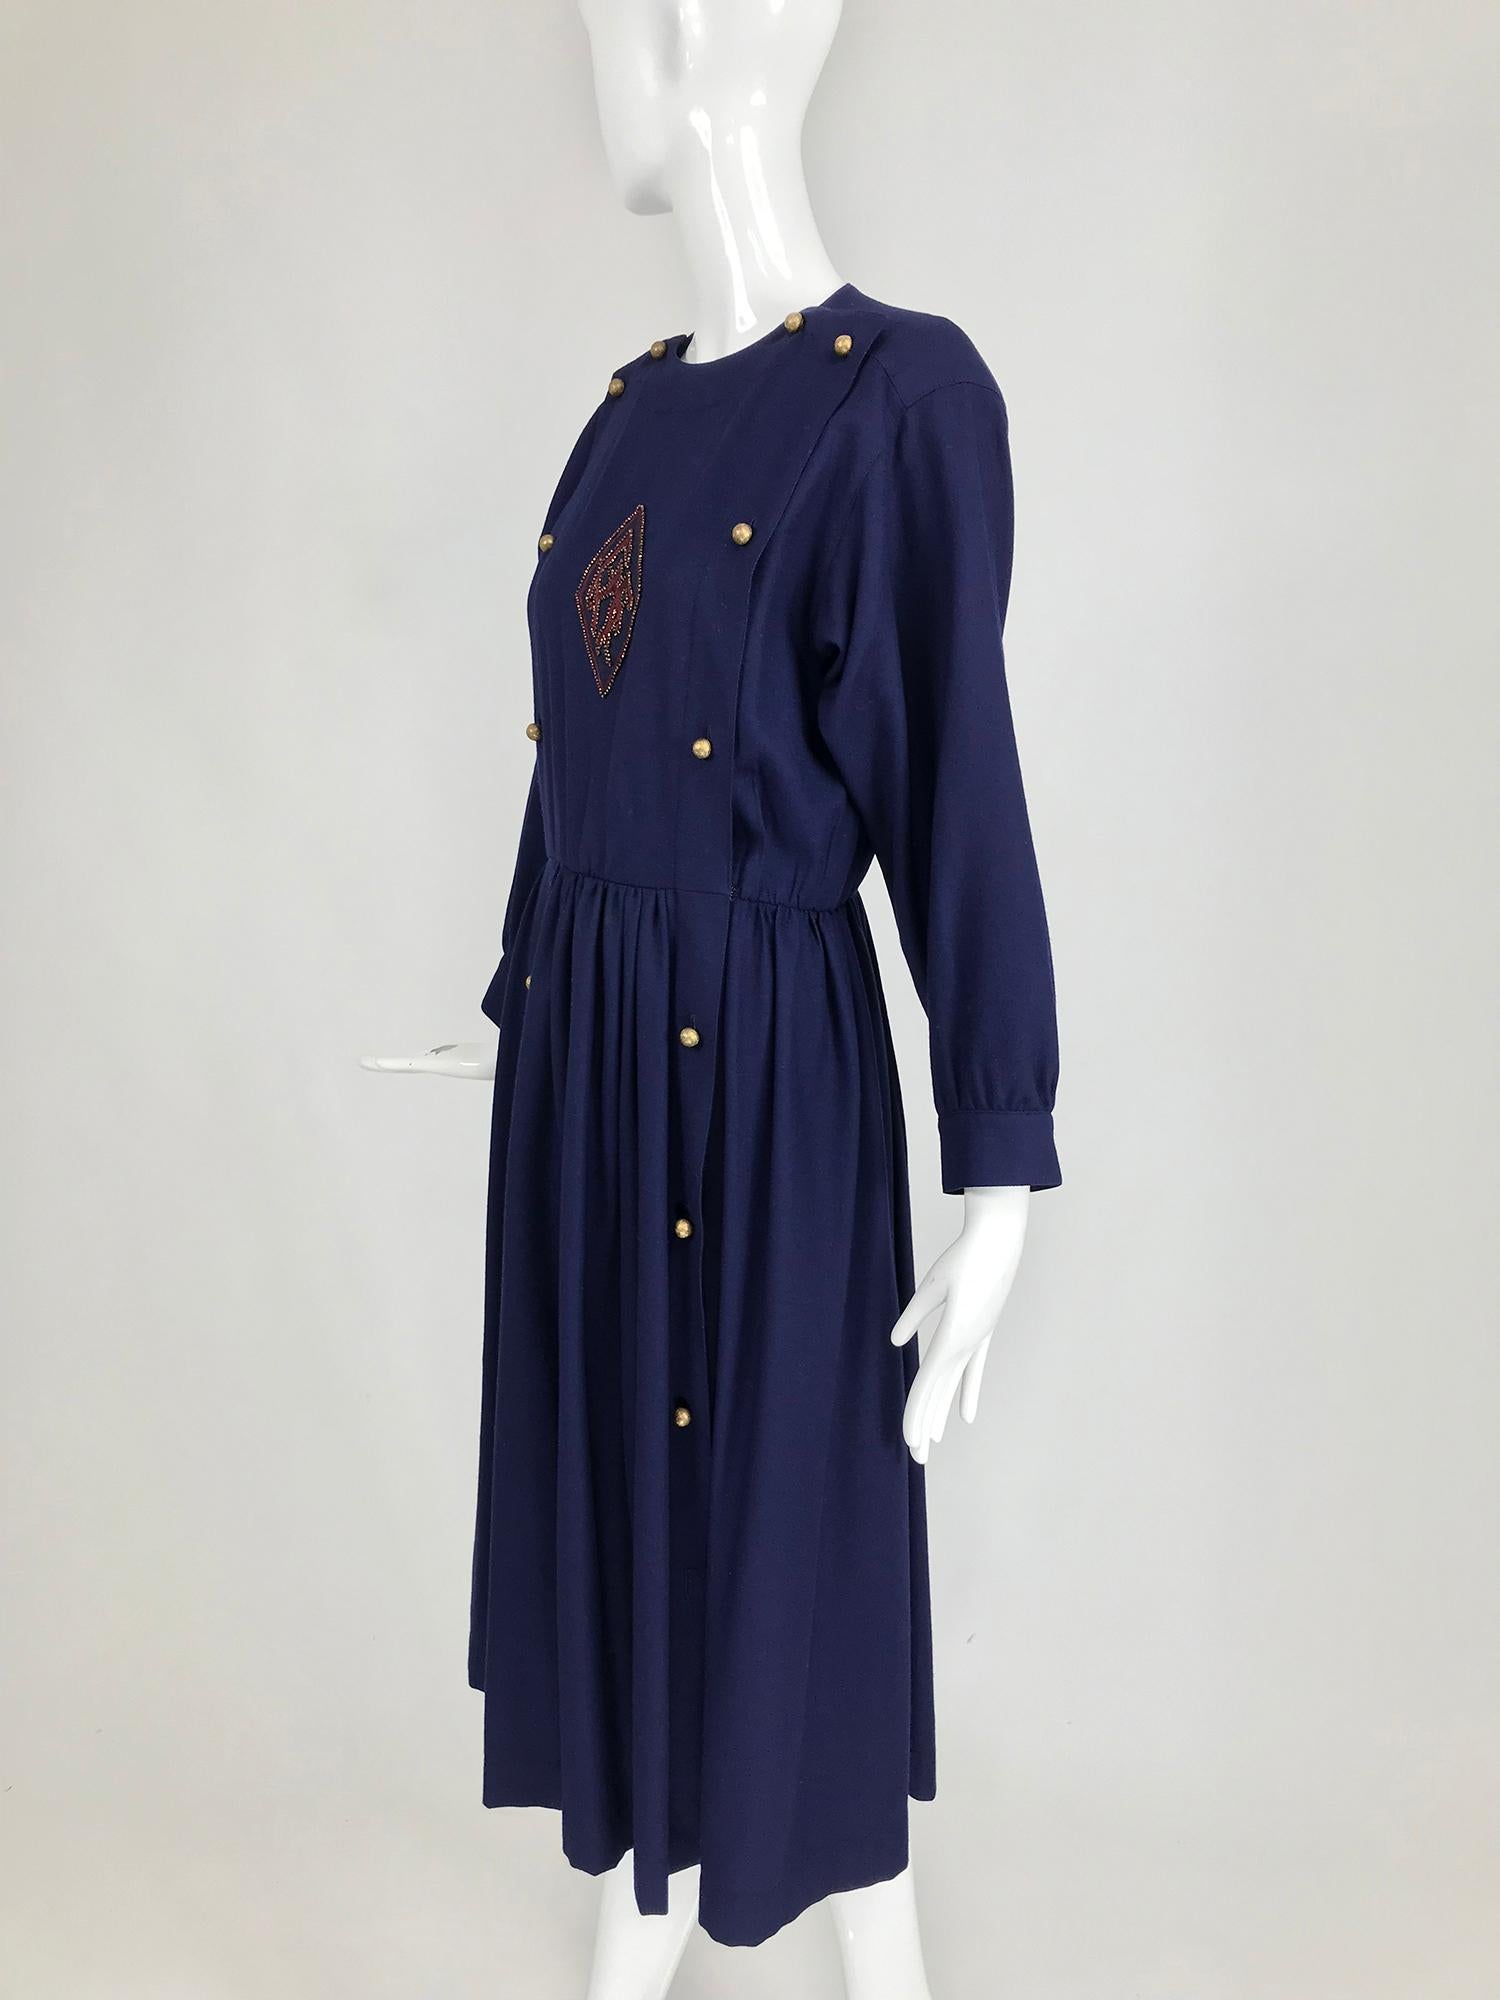 Women's Chloe 1981 Karl Lagerfeld Blue Embroidered Button Front Dress Documented